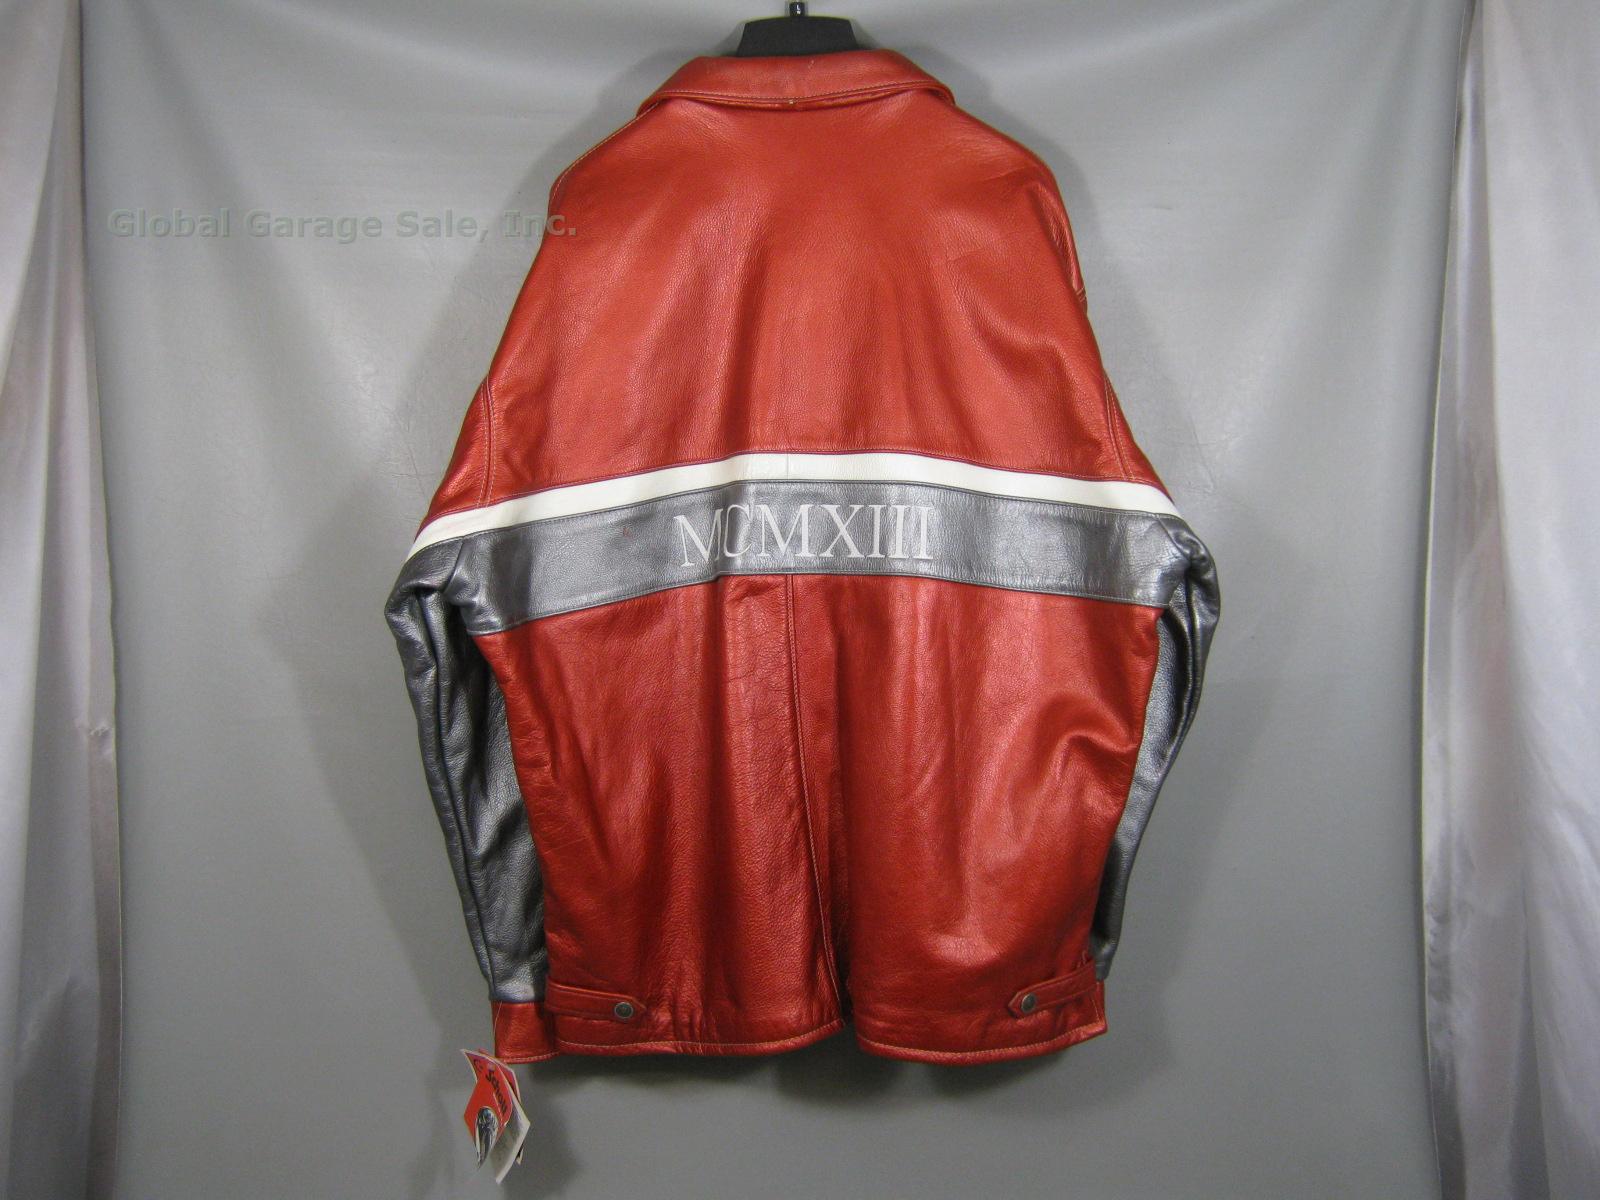 New Mens Schott MCMXIII 1913 Red Silver White Leather Motorcycle Jacket XXL 2XL 5